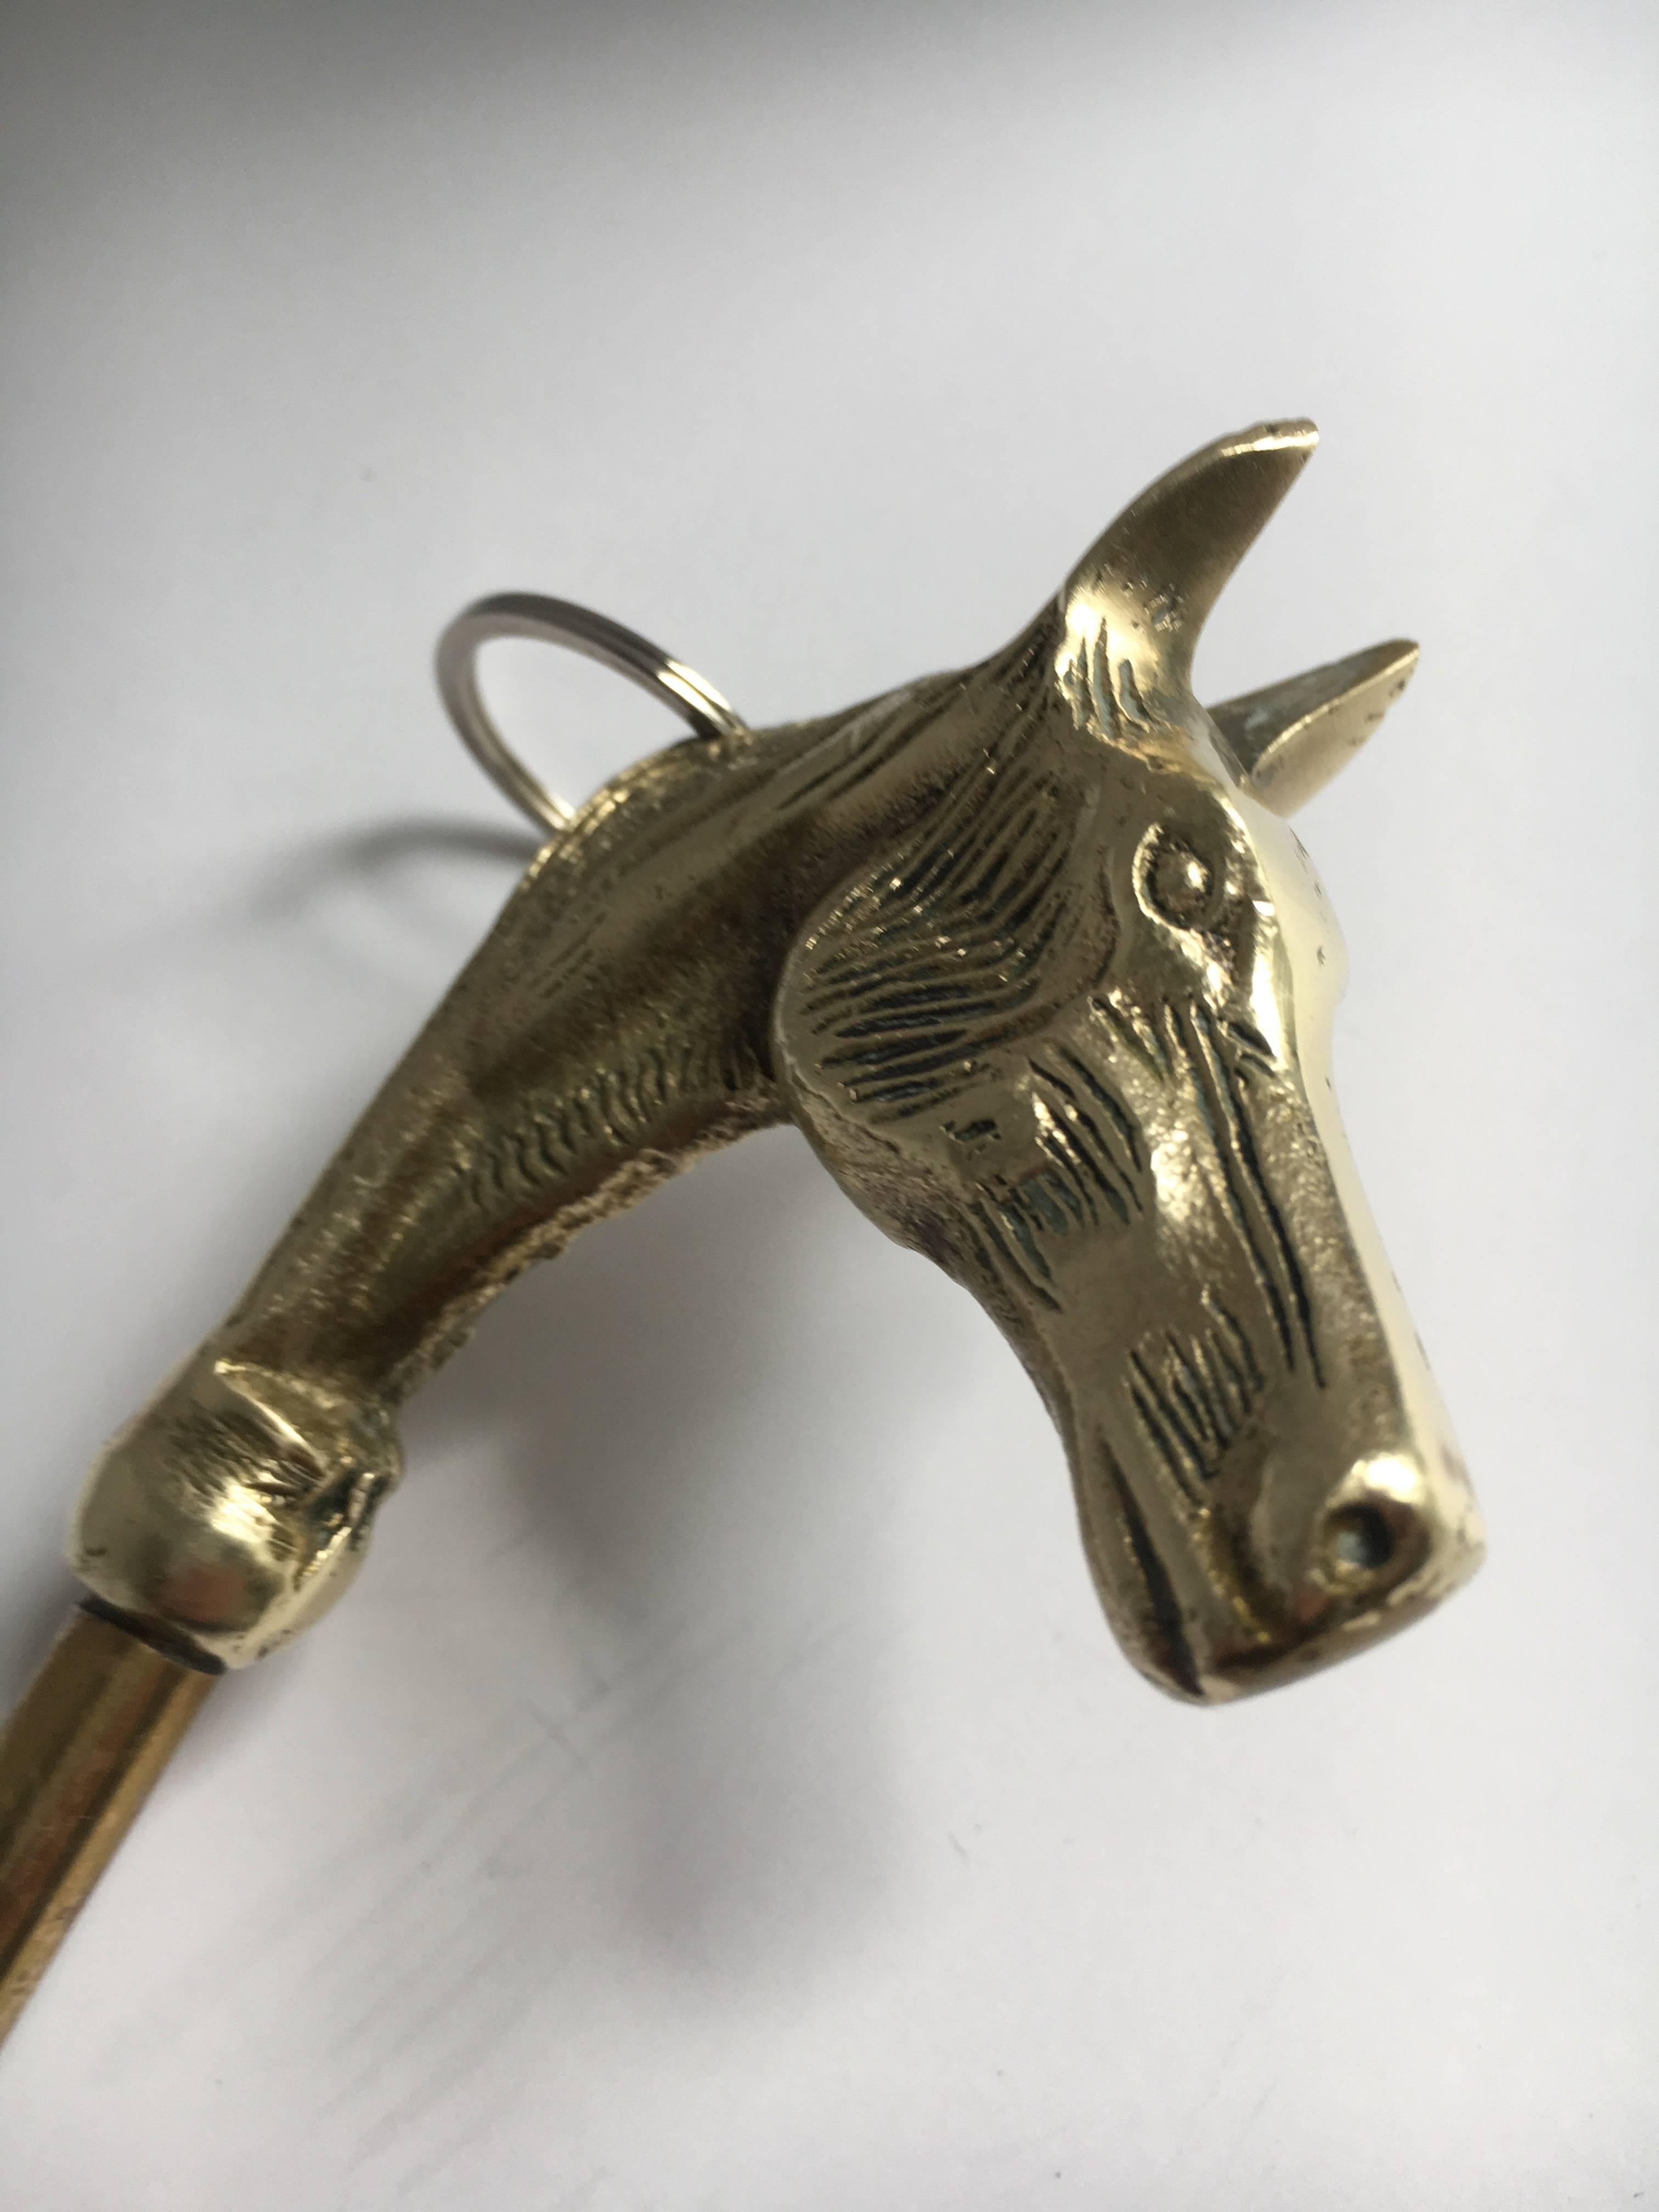 20th Century Brass Shoe Horn with Horse Final Hook